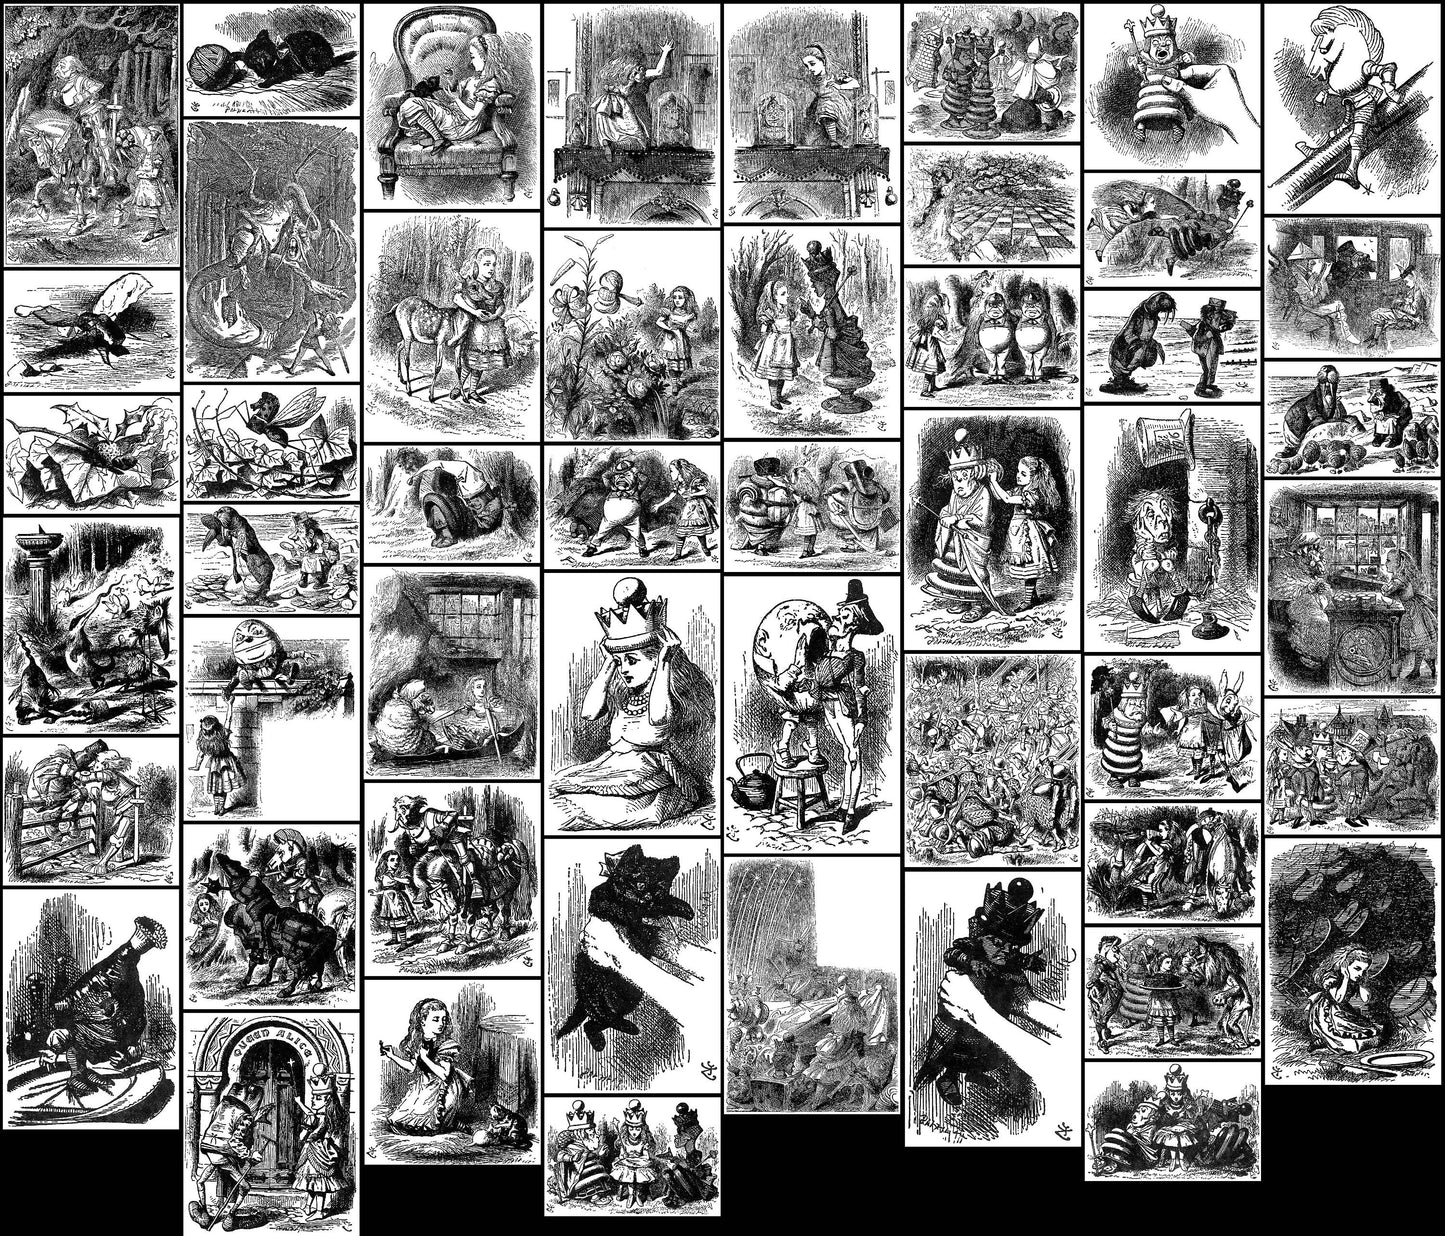 Alice in Wonderland Through the Looking Glass Black & White Illustrations [50 Images]